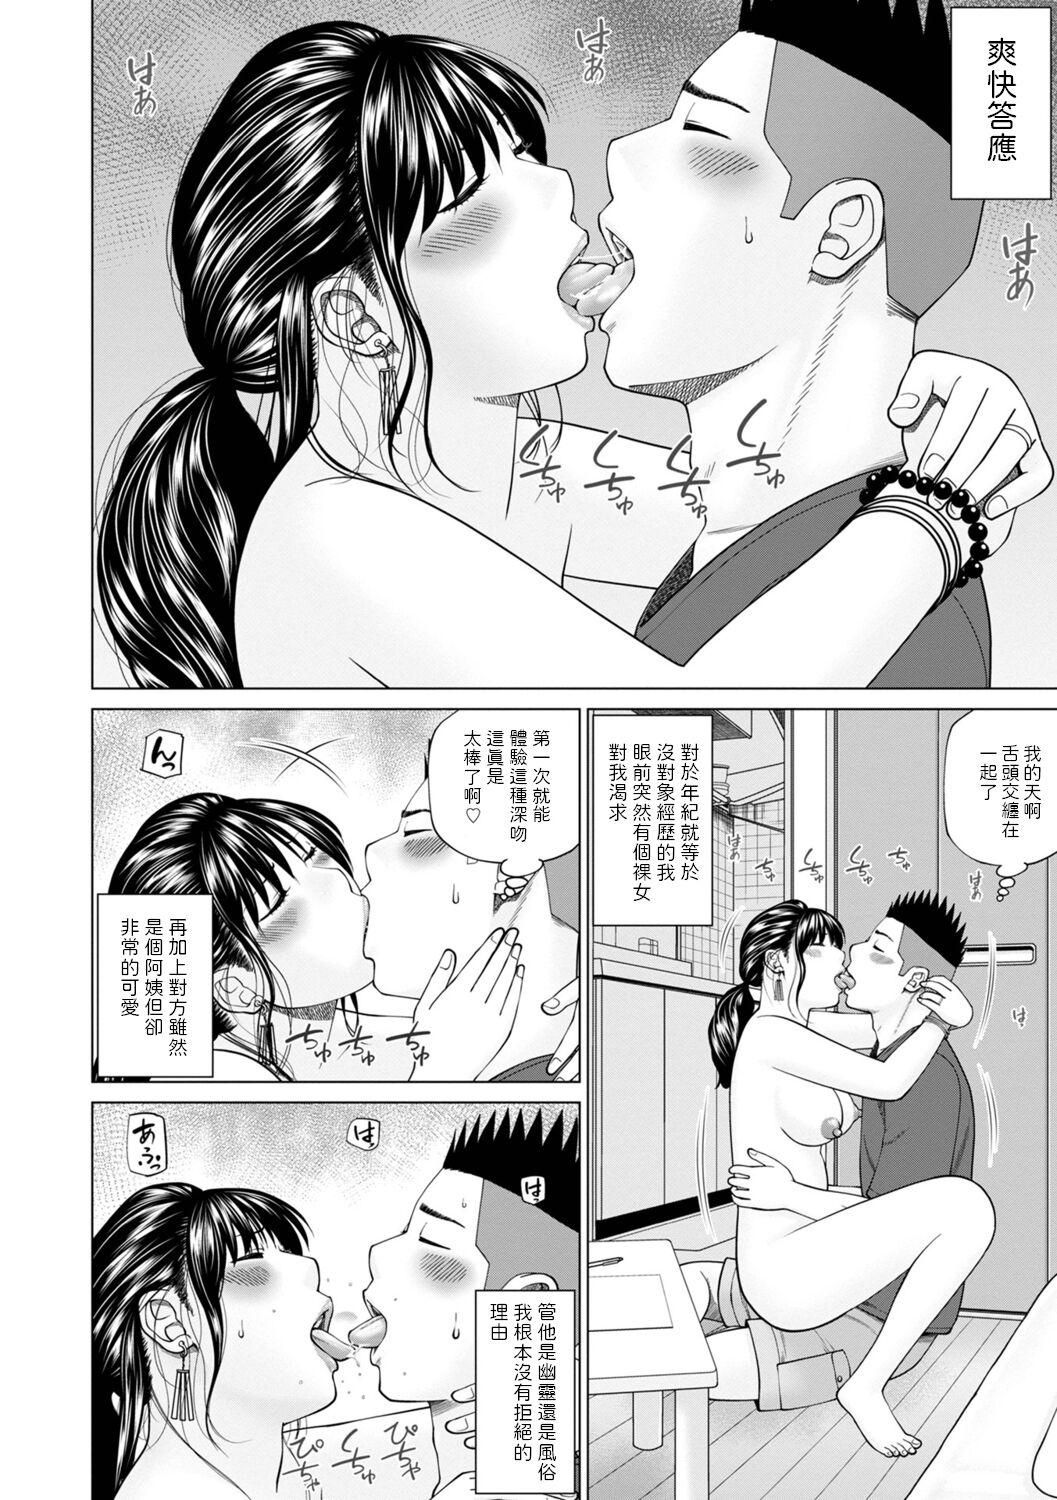 Assfuck [黒木秀彦] 人妻除霊師 (WEB版コミック激ヤバ! Vol.150) 中文翻譯 Old Vs Young - Page 10